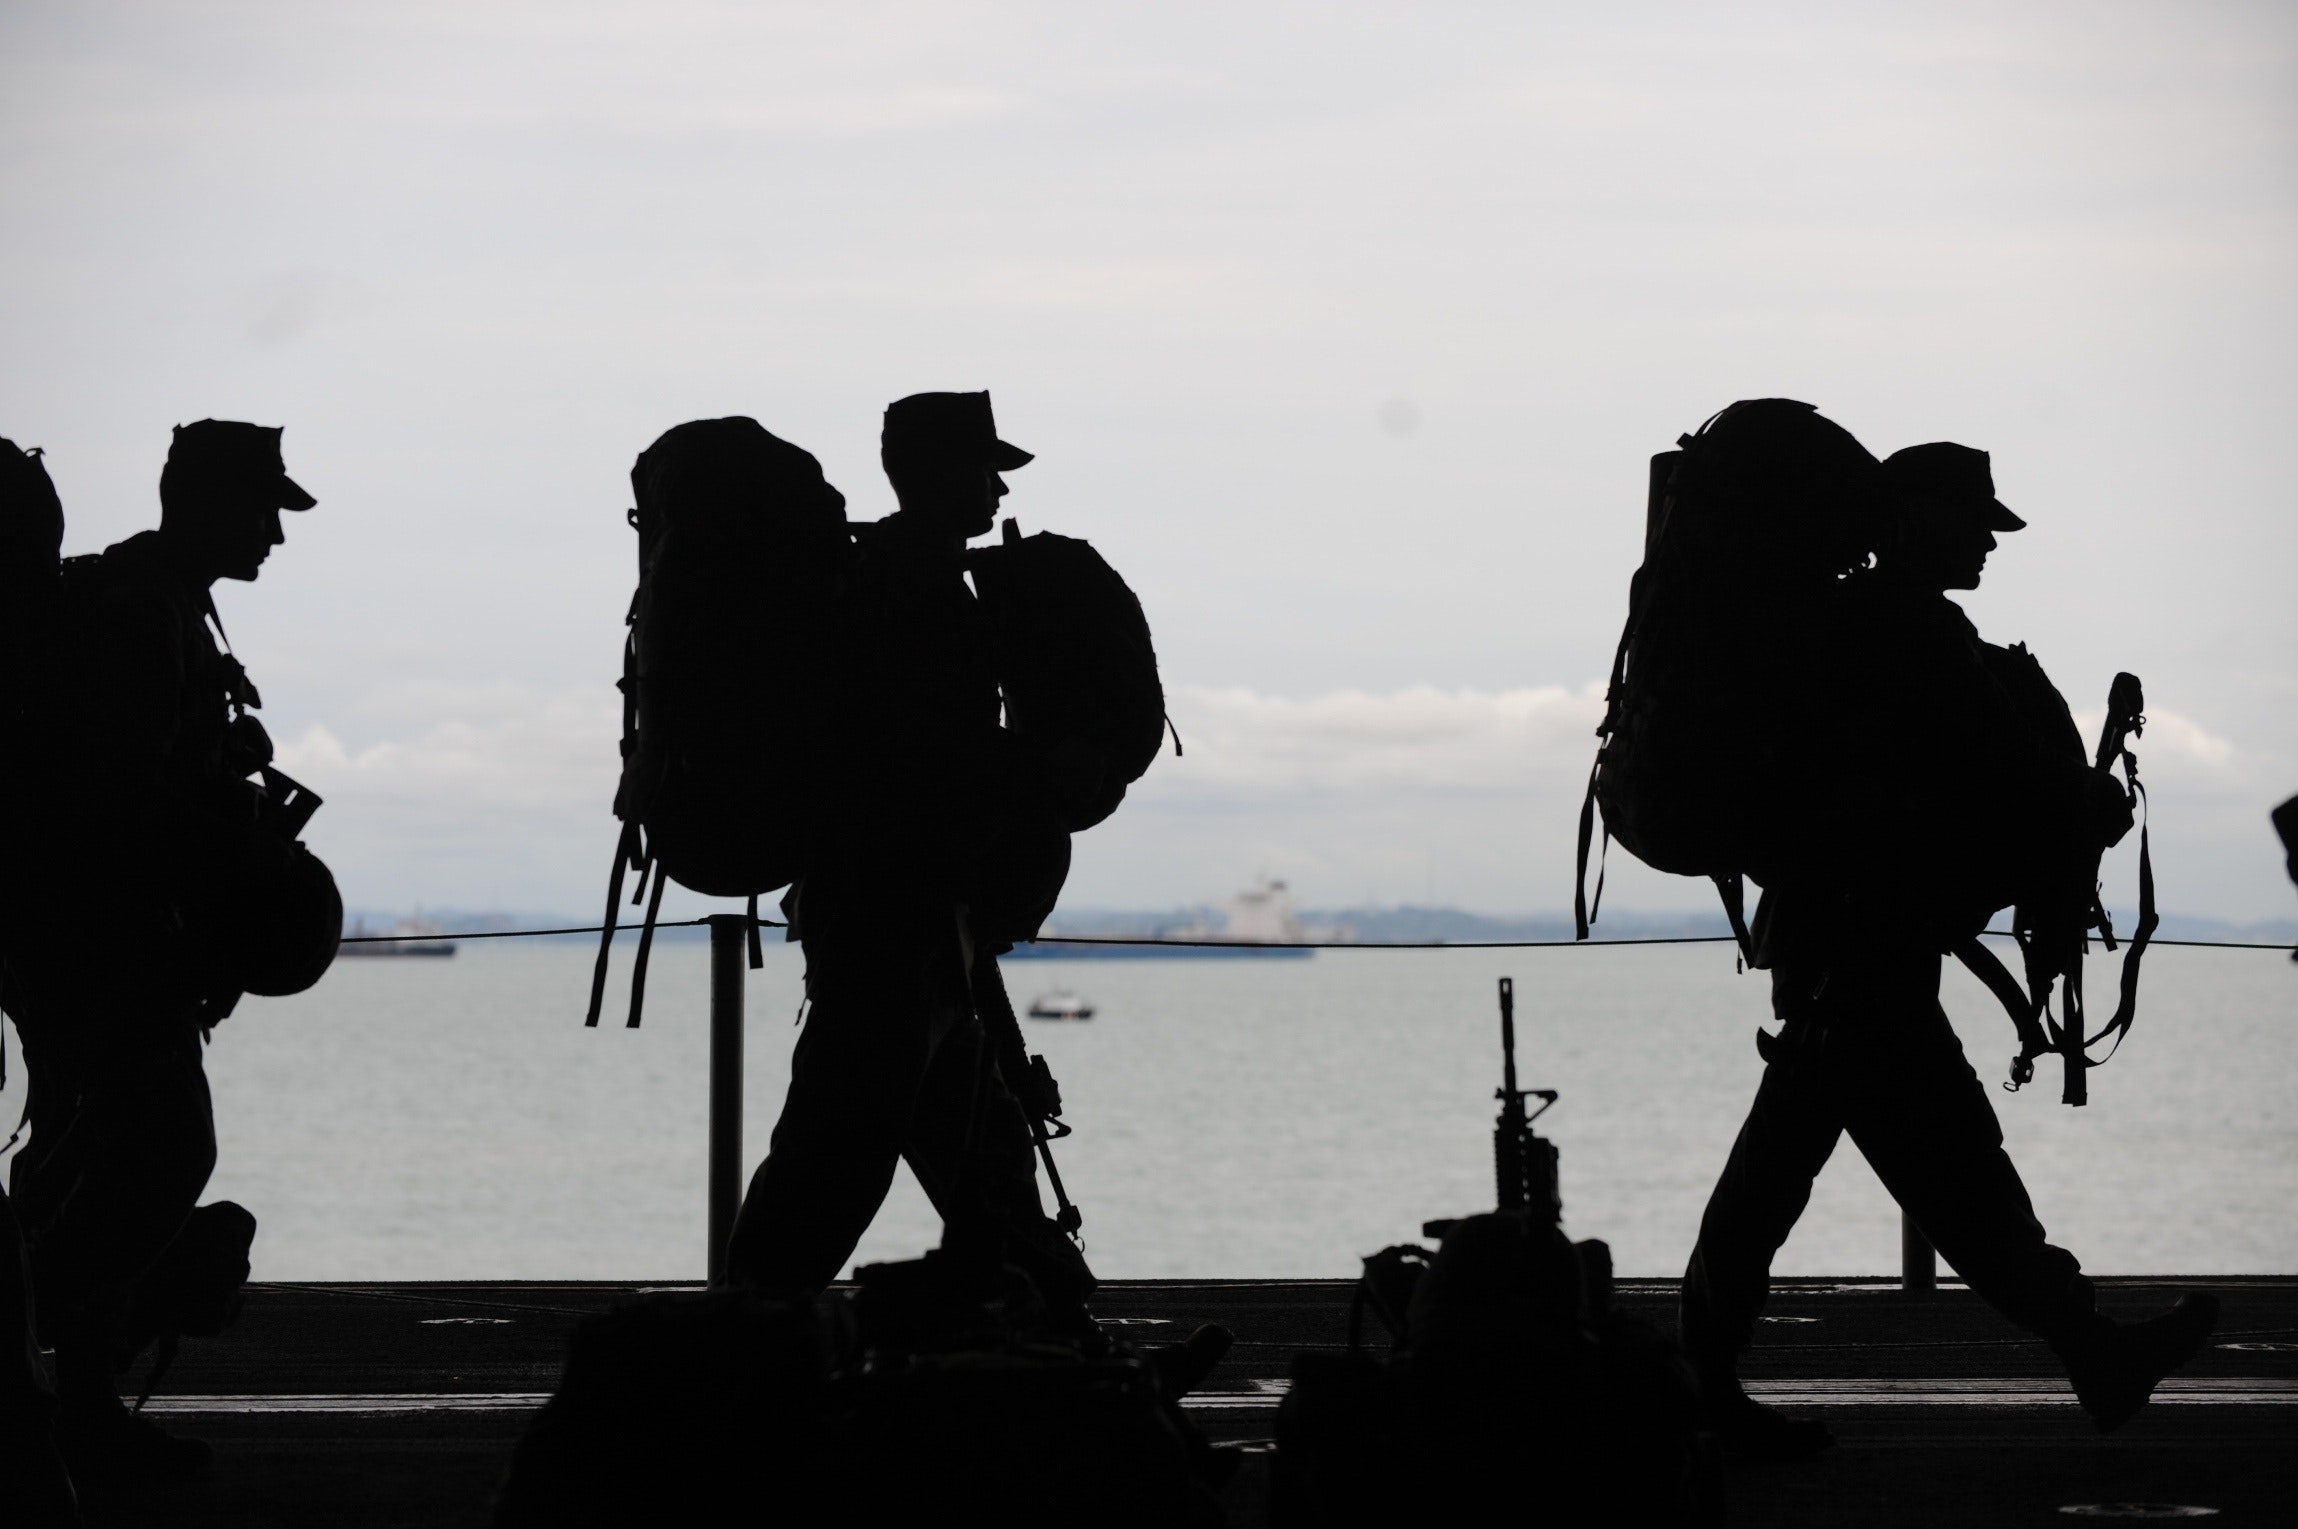 Silhouette of Military Personnel Walking On Ship